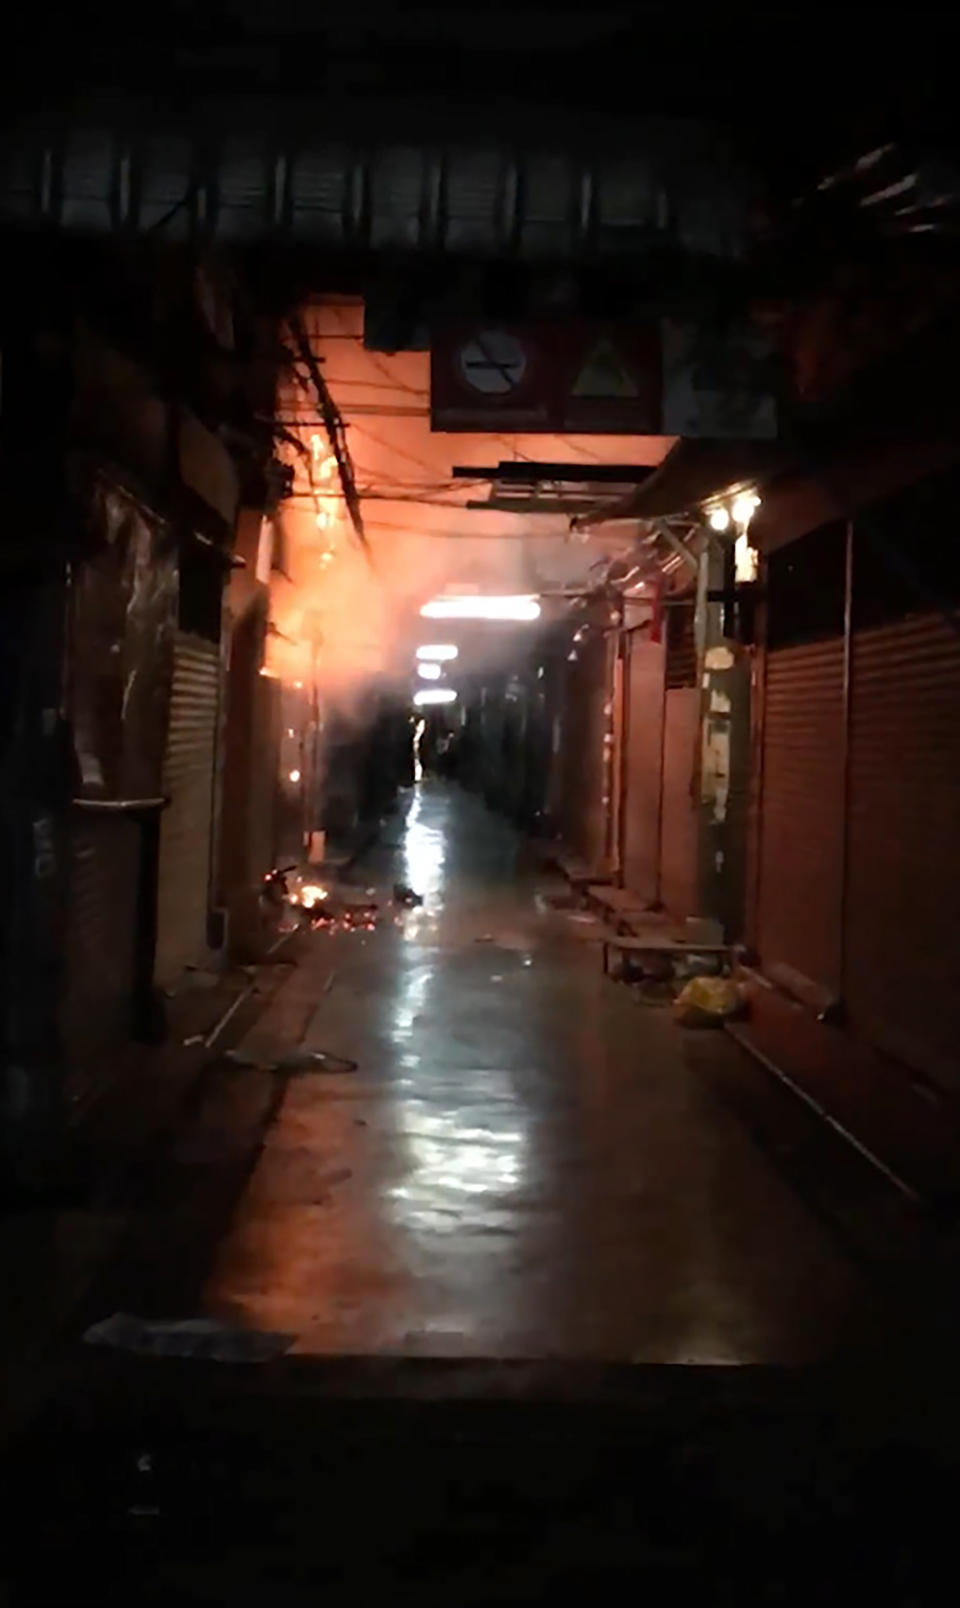 This Sunday, June 2, 2019 image taken from video provided by Younes Parvin shows a fire at Bangkok's Chatuchak weekend market, Thailand. Thai authorities are investigating an after-hours fire that roared through Chatuchak market, destroying dozens of the small shops crammed inside one of Asia's most popular bazaars. (Younes Parvin via AP Photo)